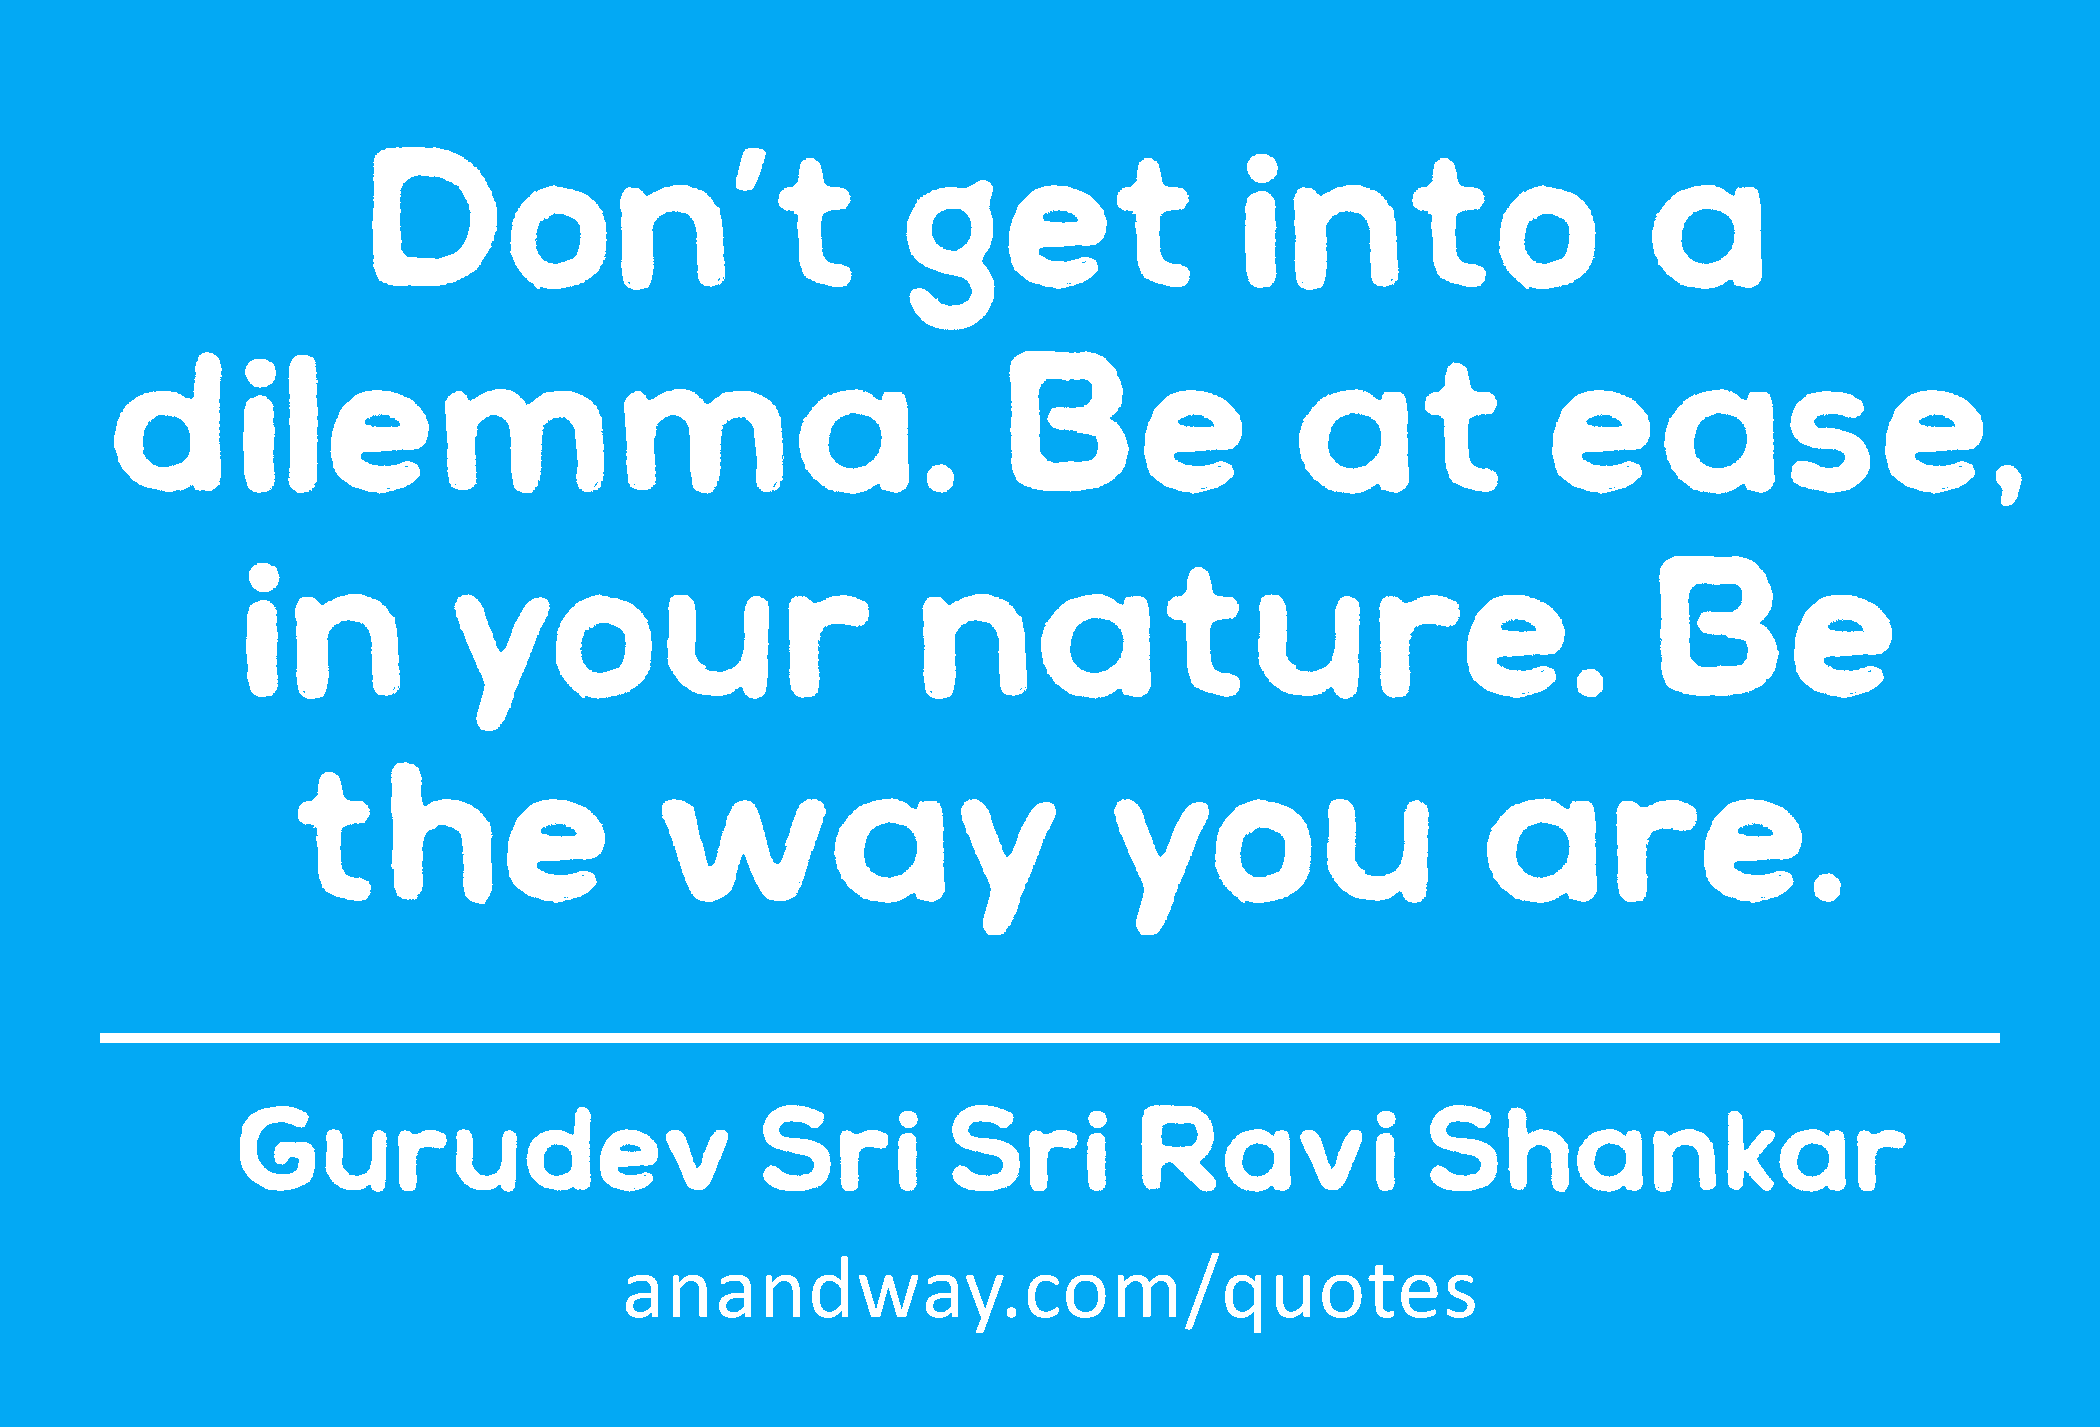 Don’t get into a dilemma. Be at ease, in your nature. Be the way you are. 
 -Gurudev Sri Sri Ravi Shankar